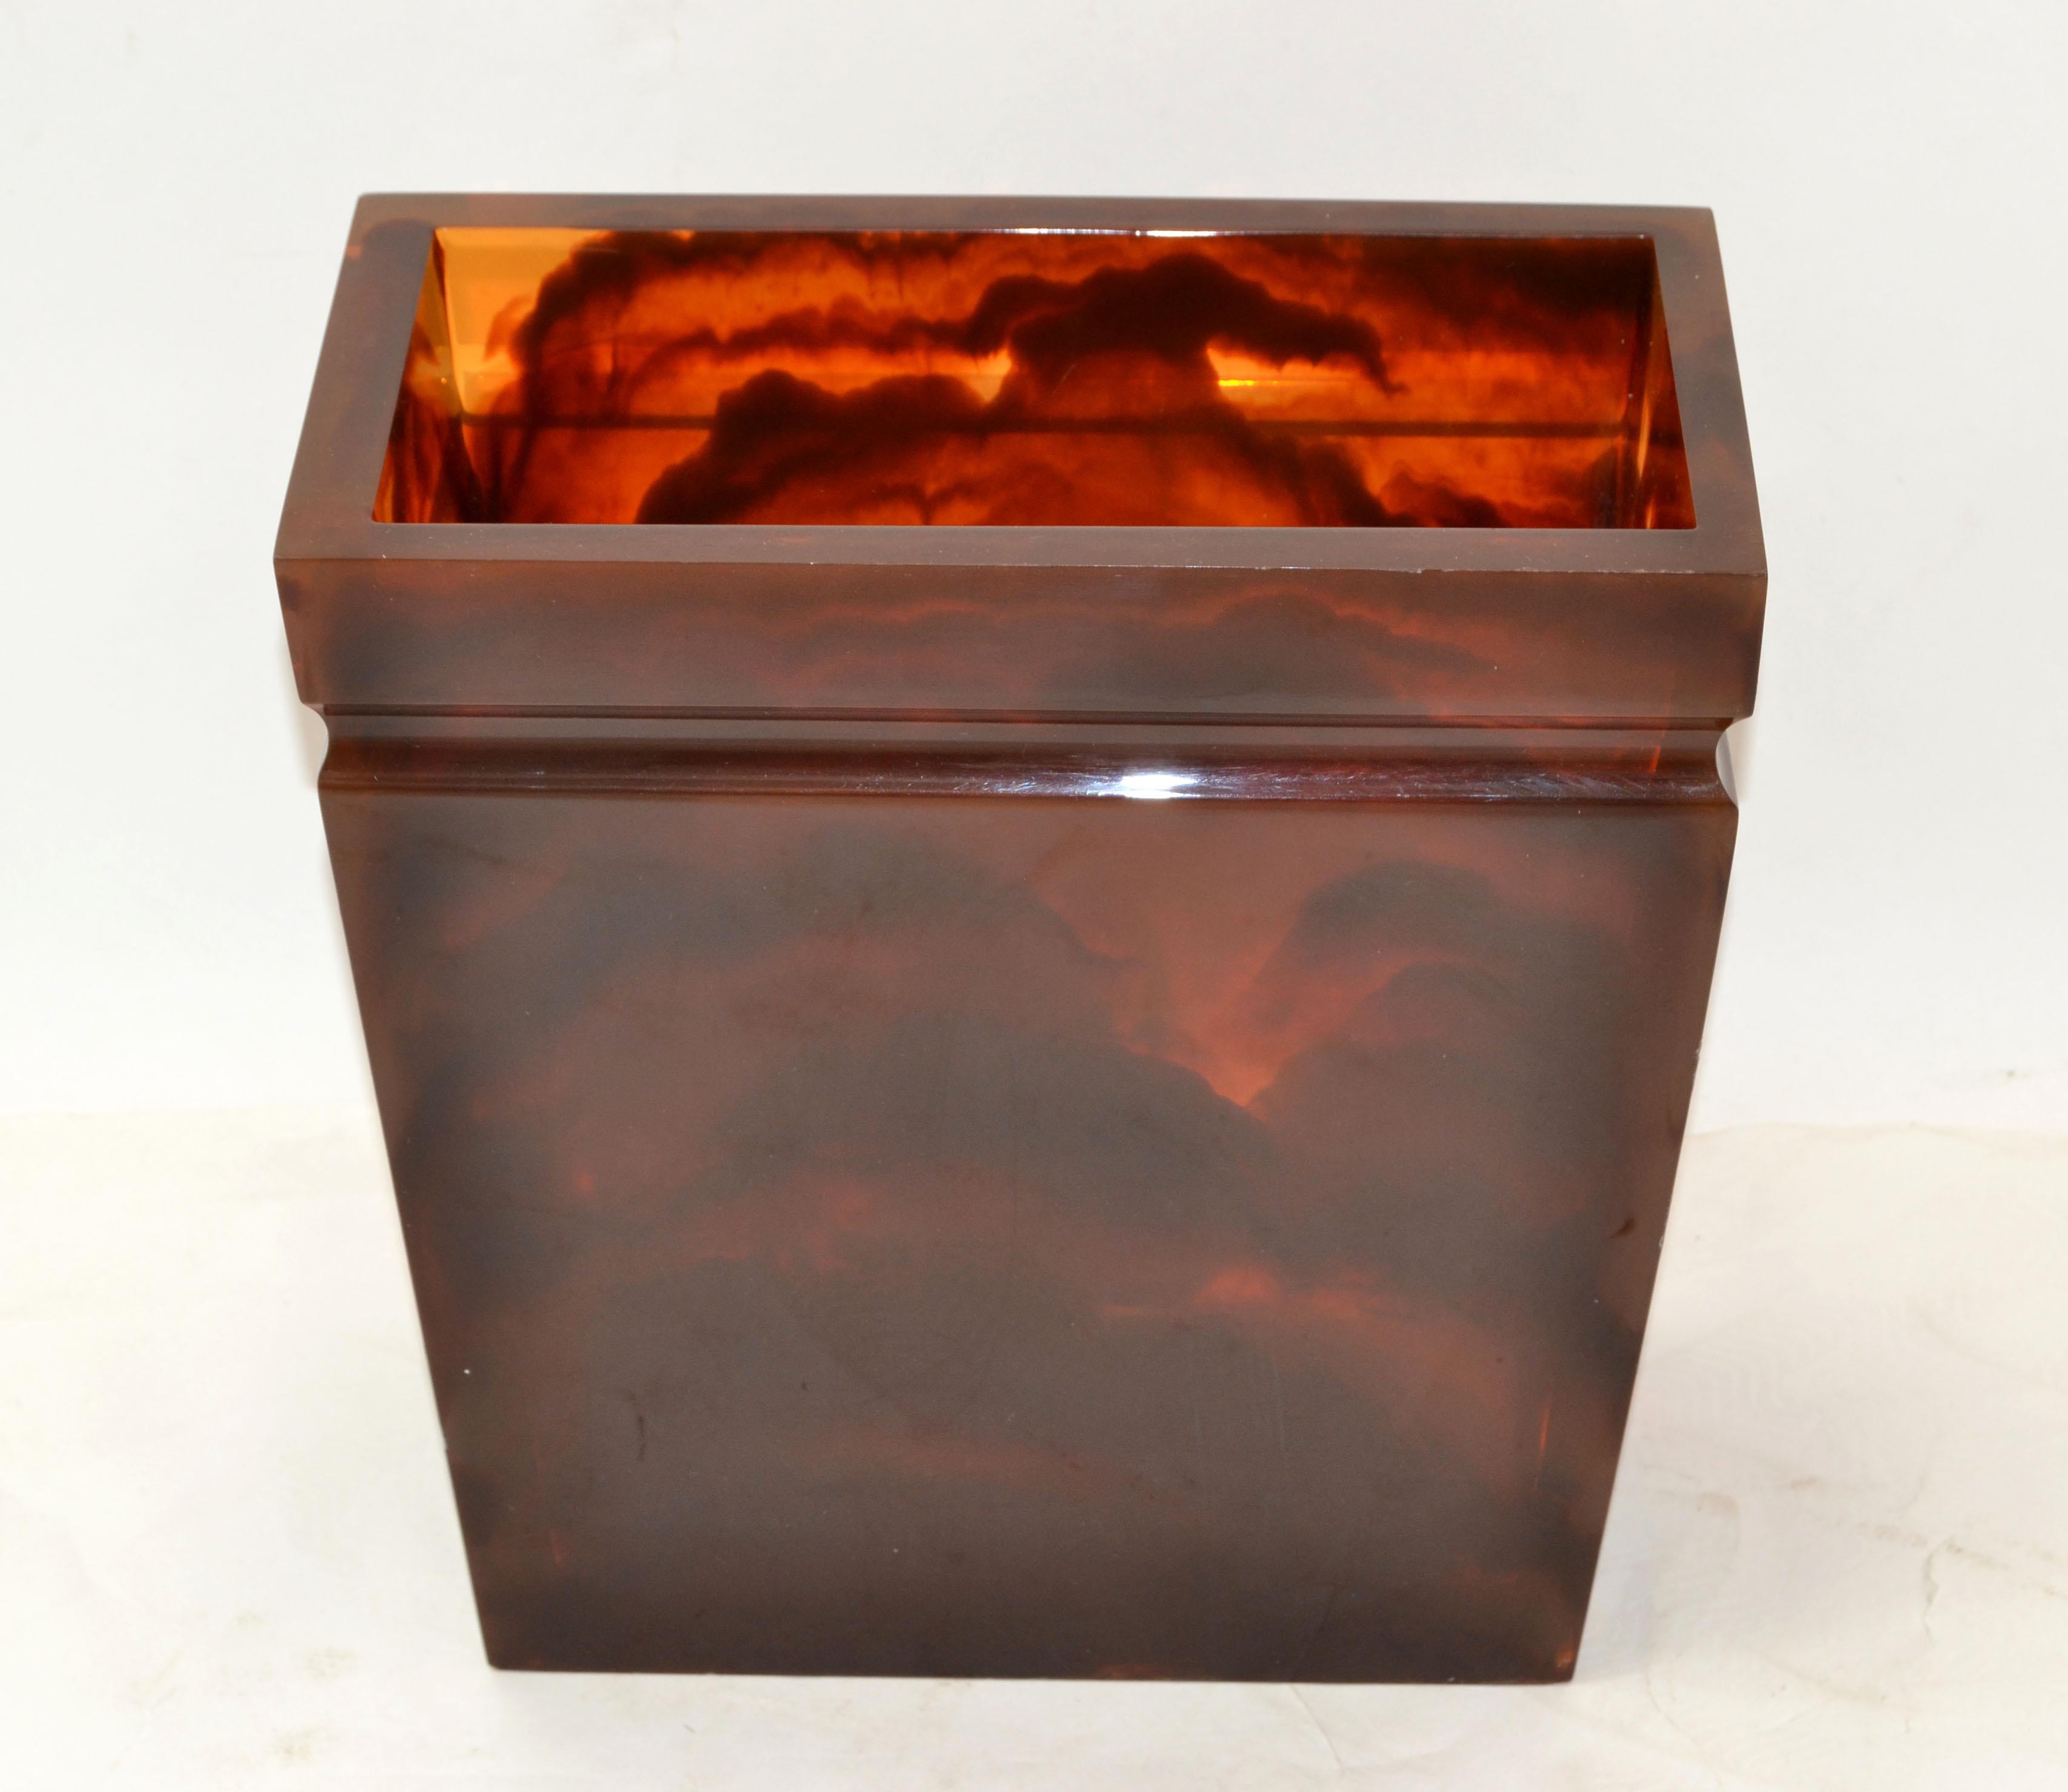 American Mid-Century Modern thick Lucite trash basket, waste can or umbrella stand in an dark Amber marble pattern.
Made in the USA circa 1970.